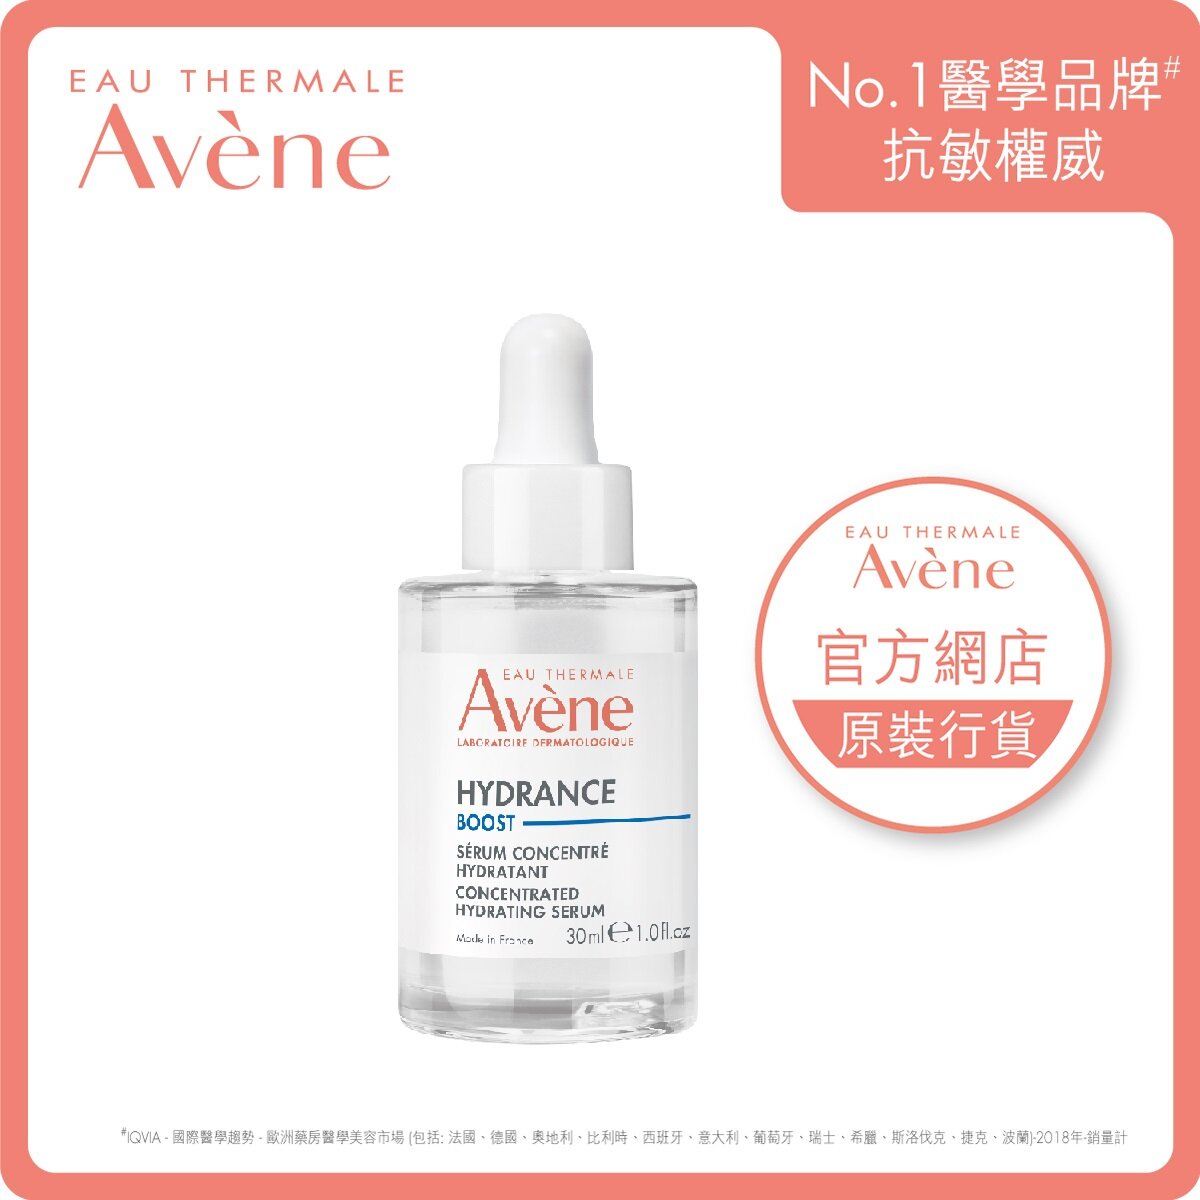 Hydrance Boost Hydrating Concentrated Serum